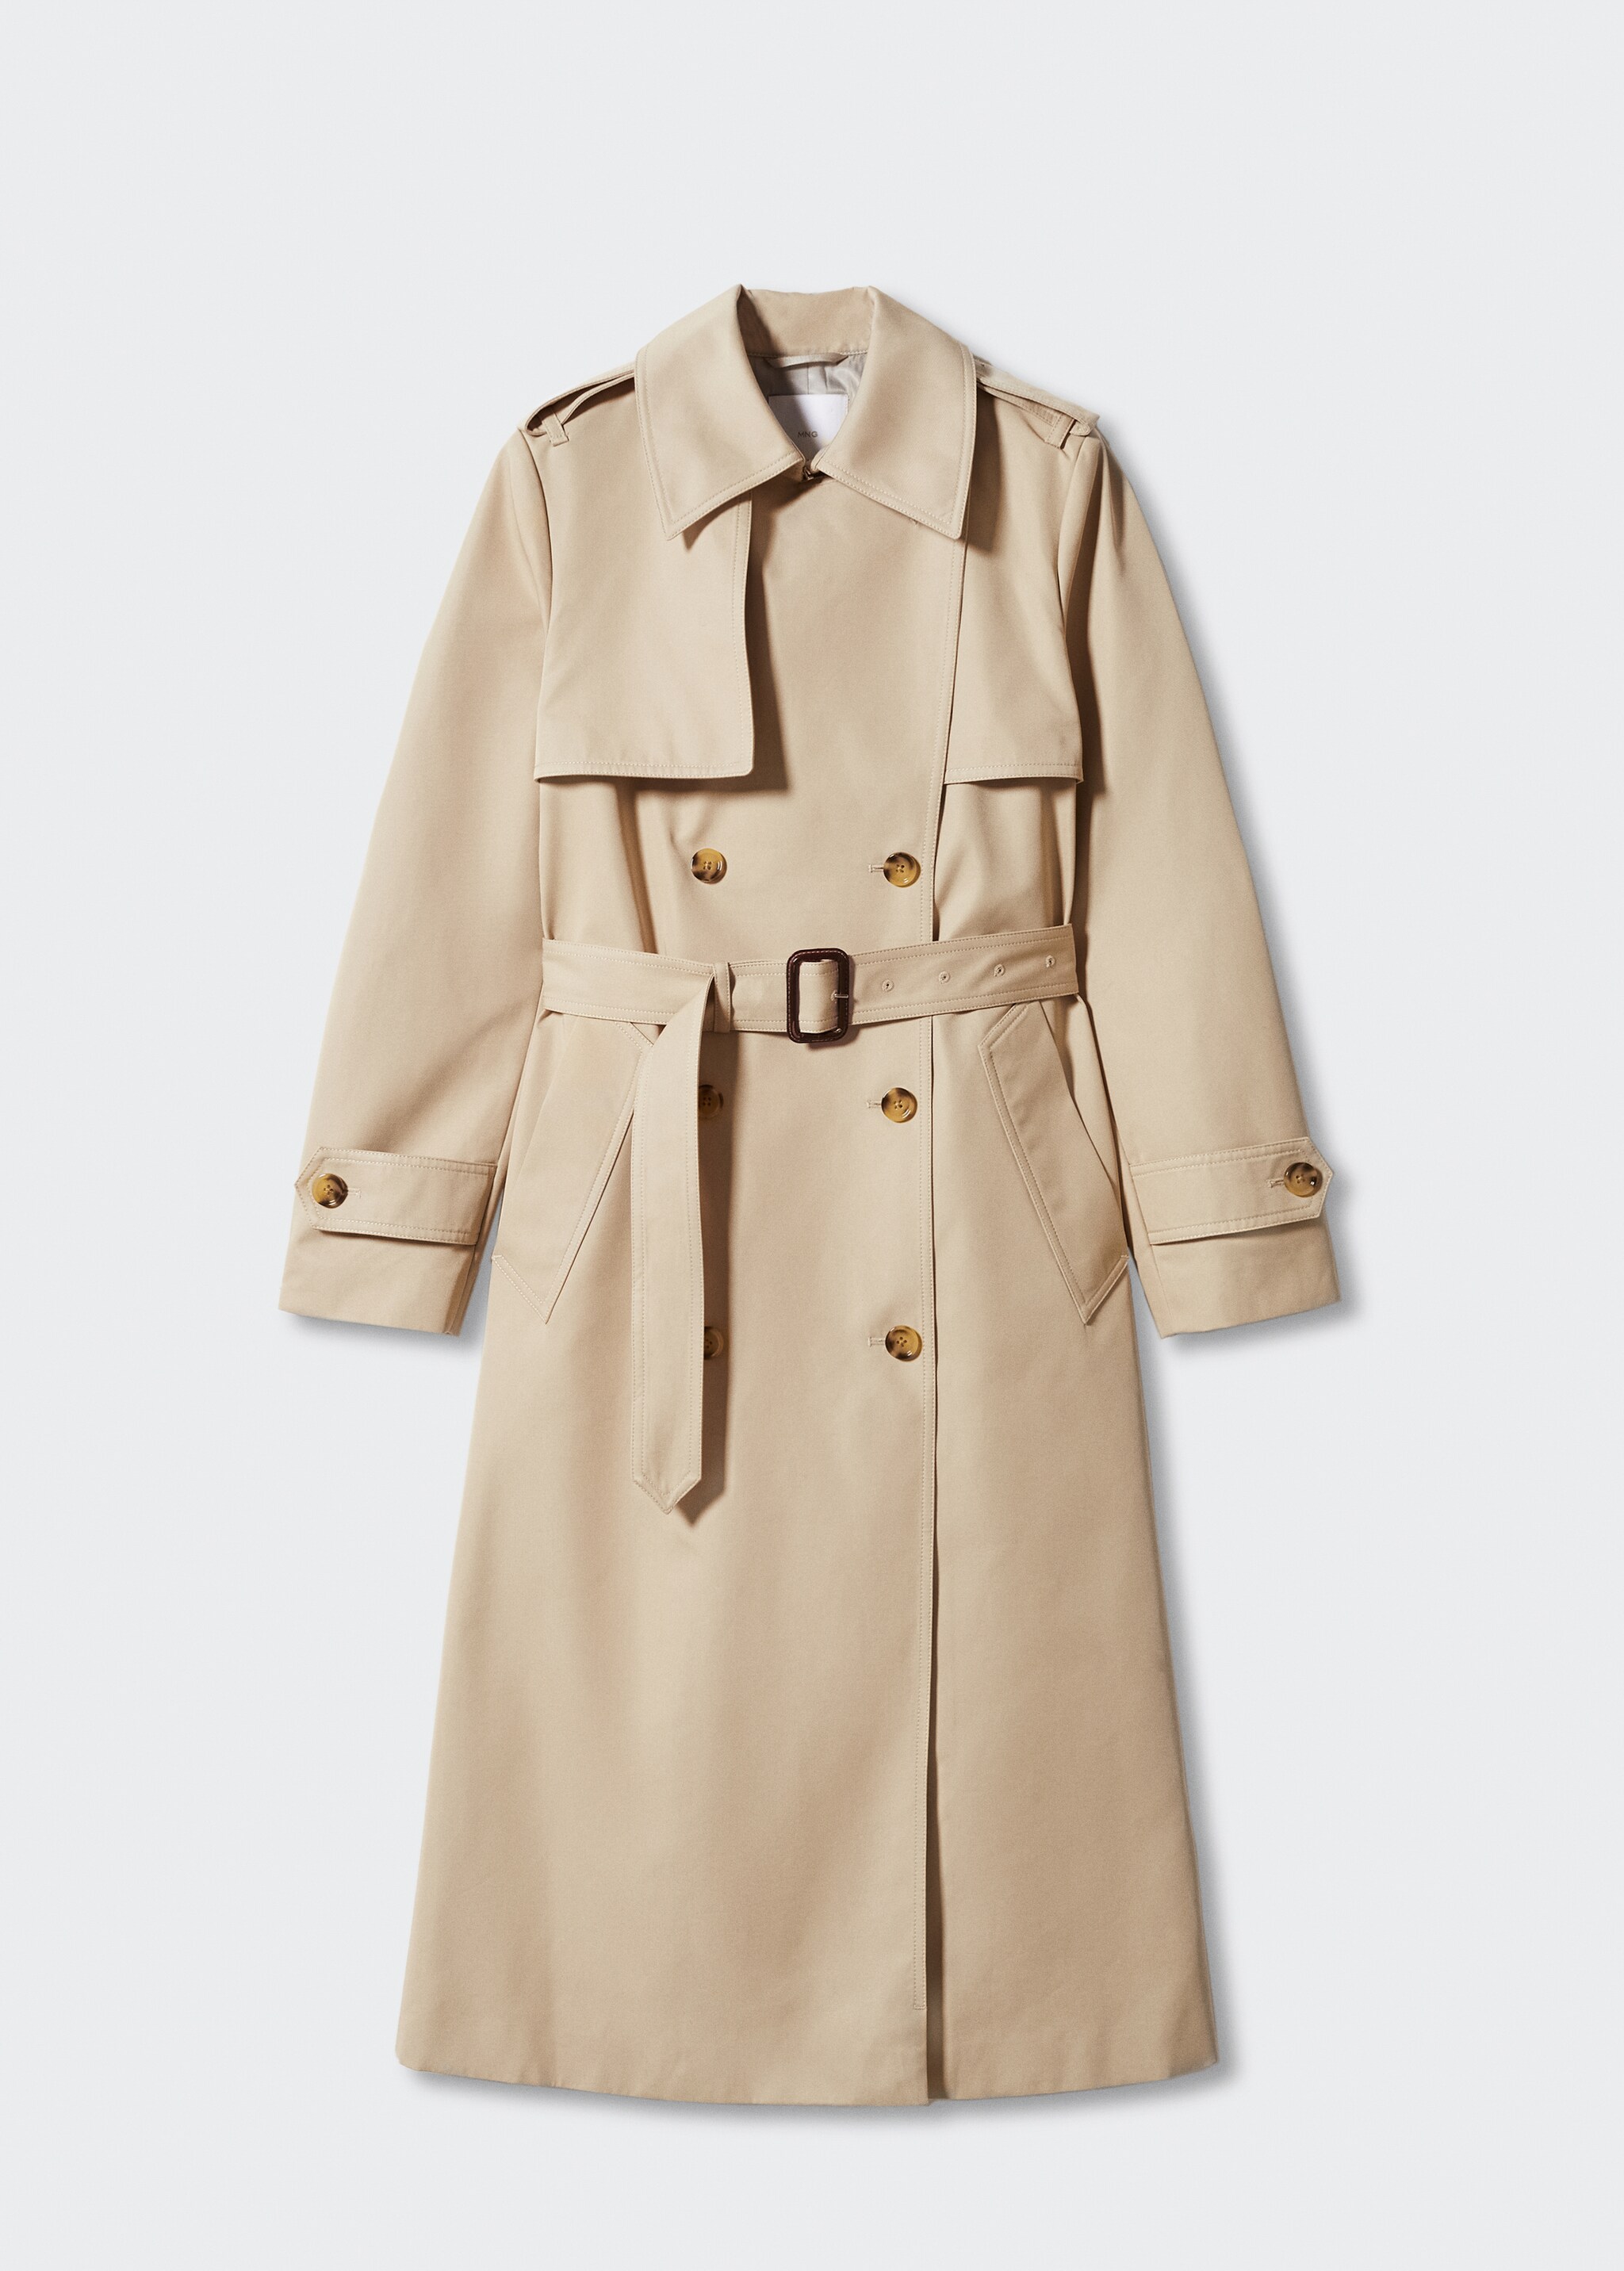 Classic long trench coat - Article without model